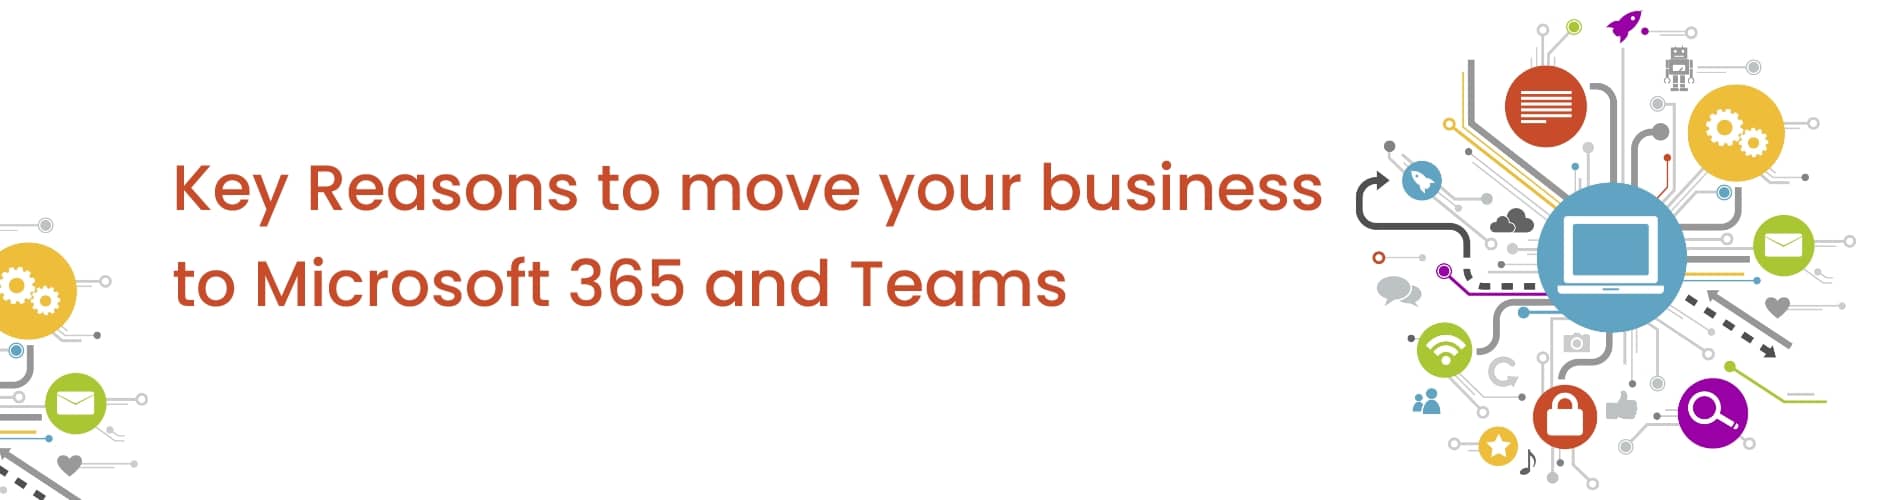 key reasons to move your business to microsoft 365 and teams